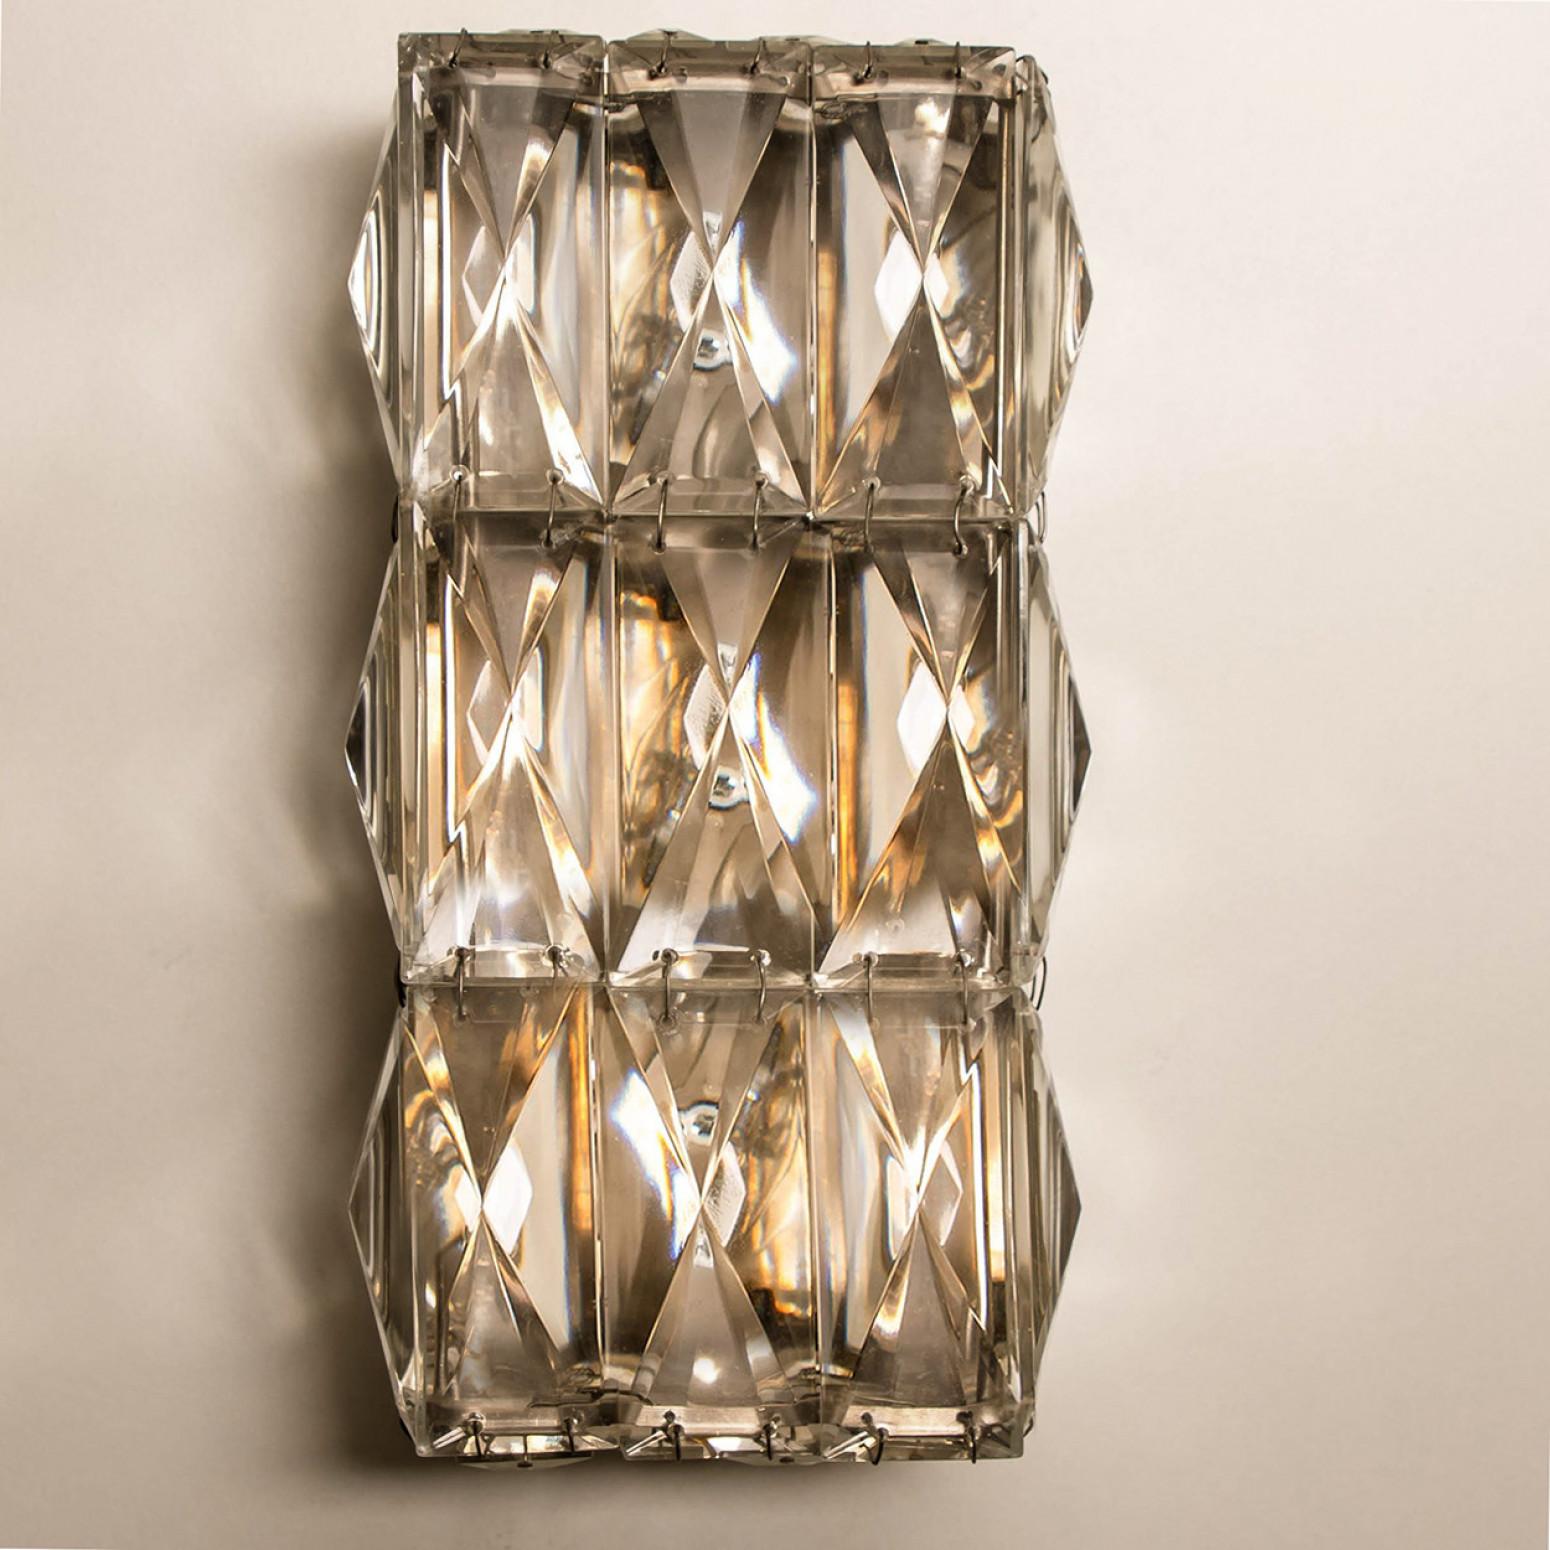 1 of the 6 Bakalowits Wall Lights, Nickel-Plated And Crystal, 1970 For Sale 7